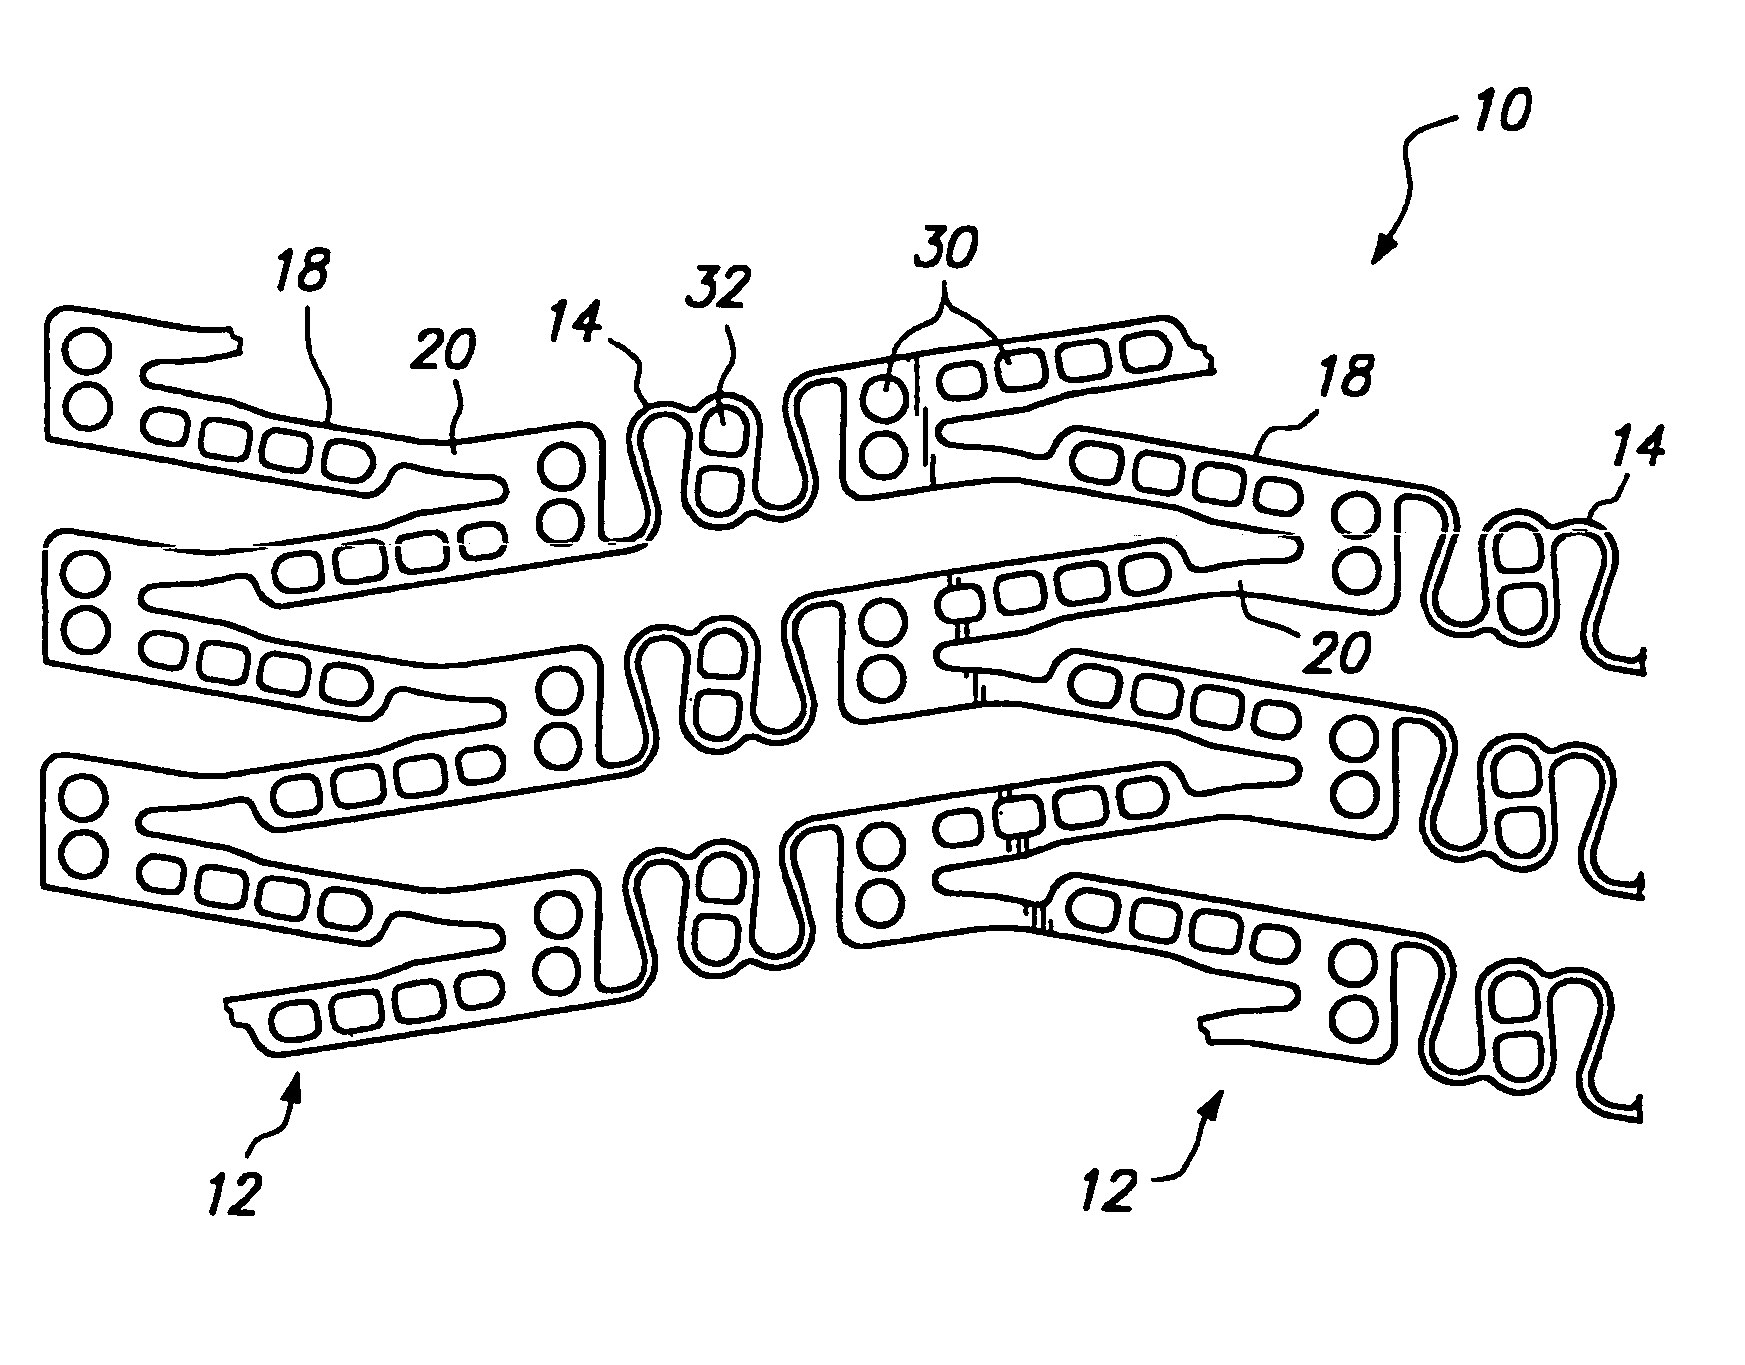 Expandable medical device with improved spatial distribution